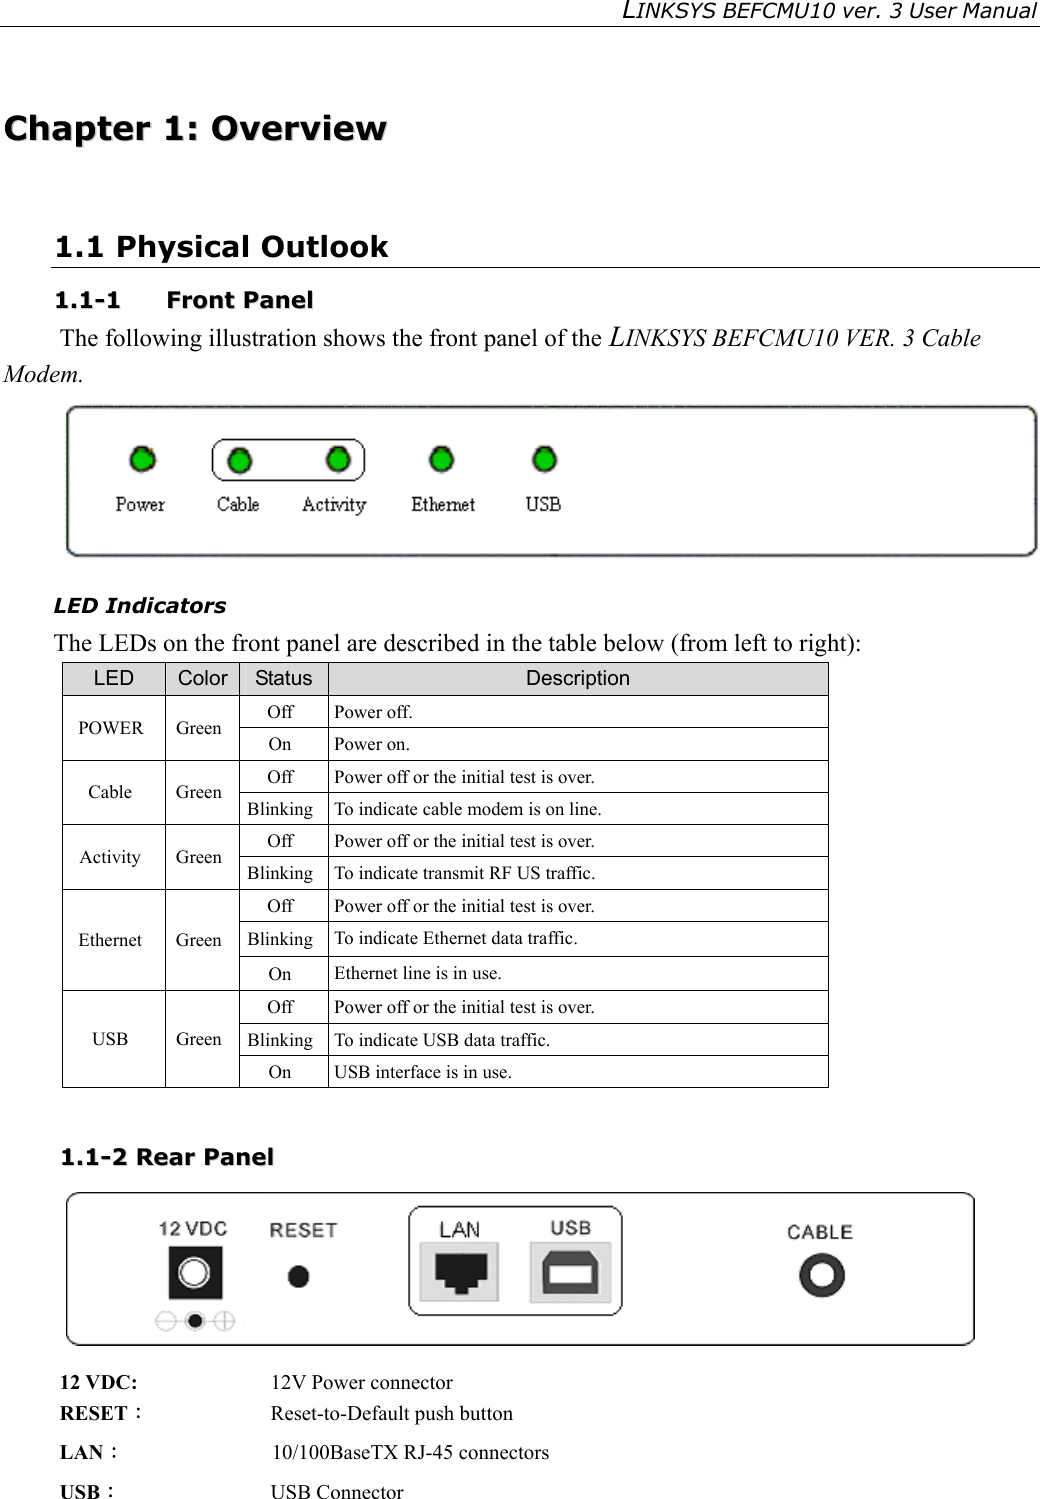 LINKSYS BEFCMU10 ver. 3 User Manual    CChhaapptteerr  11::  OOvveerrvviieeww  1.1 Physical Outlook 11..11--11  FFrroonntt  PPaanneell  The following illustration shows the front panel of the LINKSYS BEFCMU10 VER. 3 Cable Modem.  LED Indicators The LEDs on the front panel are described in the table below (from left to right): LED  Color  Status  Description Off Power off. POWER Green  On Power on. Off  Power off or the initial test is over. Cable Green Blinking  To indicate cable modem is on line. Off  Power off or the initial test is over. Activity Green Blinking  To indicate transmit RF US traffic. Off  Power off or the initial test is over. Blinking  To indicate Ethernet data traffic. Ethernet Green On  Ethernet line is in use. Off  Power off or the initial test is over. Blinking  To indicate USB data traffic. USB Green On  USB interface is in use.  11..11--22  RReeaarr  PPaanneell   12 VDC:    12V Power connector RESET︰  Reset-to-Default push button LAN︰              10/100BaseTX RJ-45 connectors USB：  USB Connector 